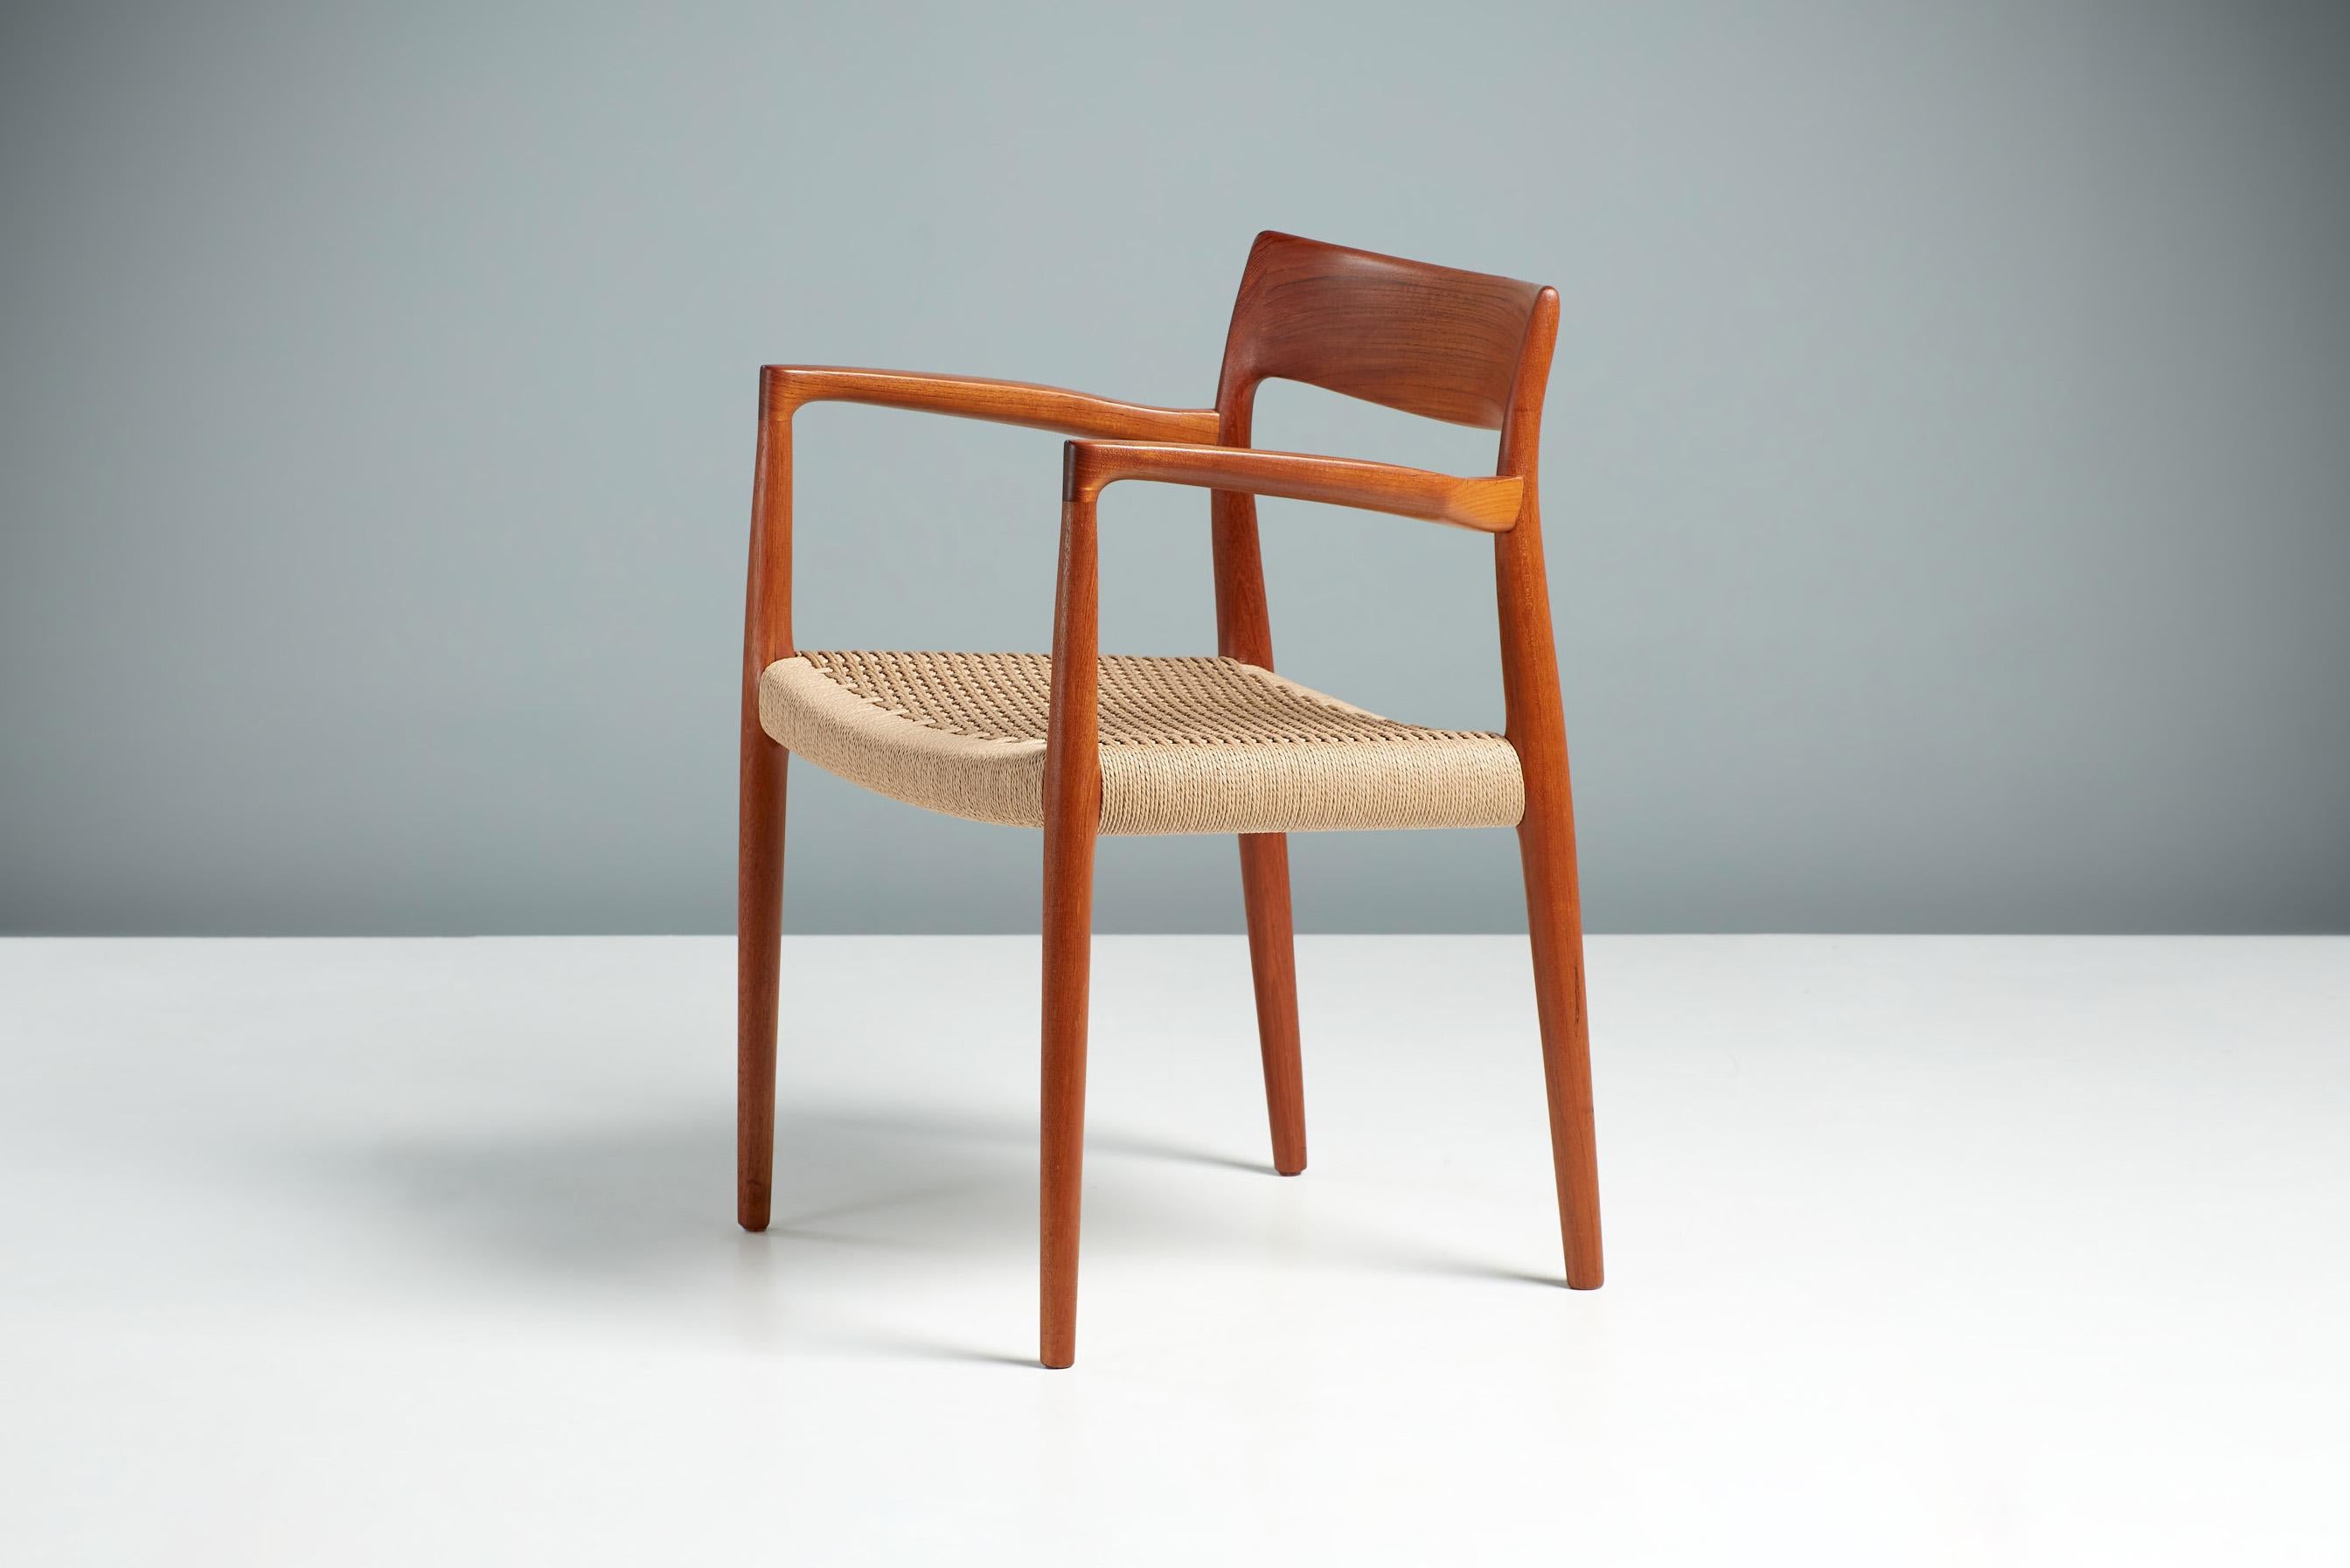 Niels Moller model 57 chair in teak & papercord, circa 1950s.

An immaculate example of this iconic design made from exquisite teak. Designed by Niels Moller for his own company: J.L. Moller Mobelfabrik in Denmark, 1959. This piece has been